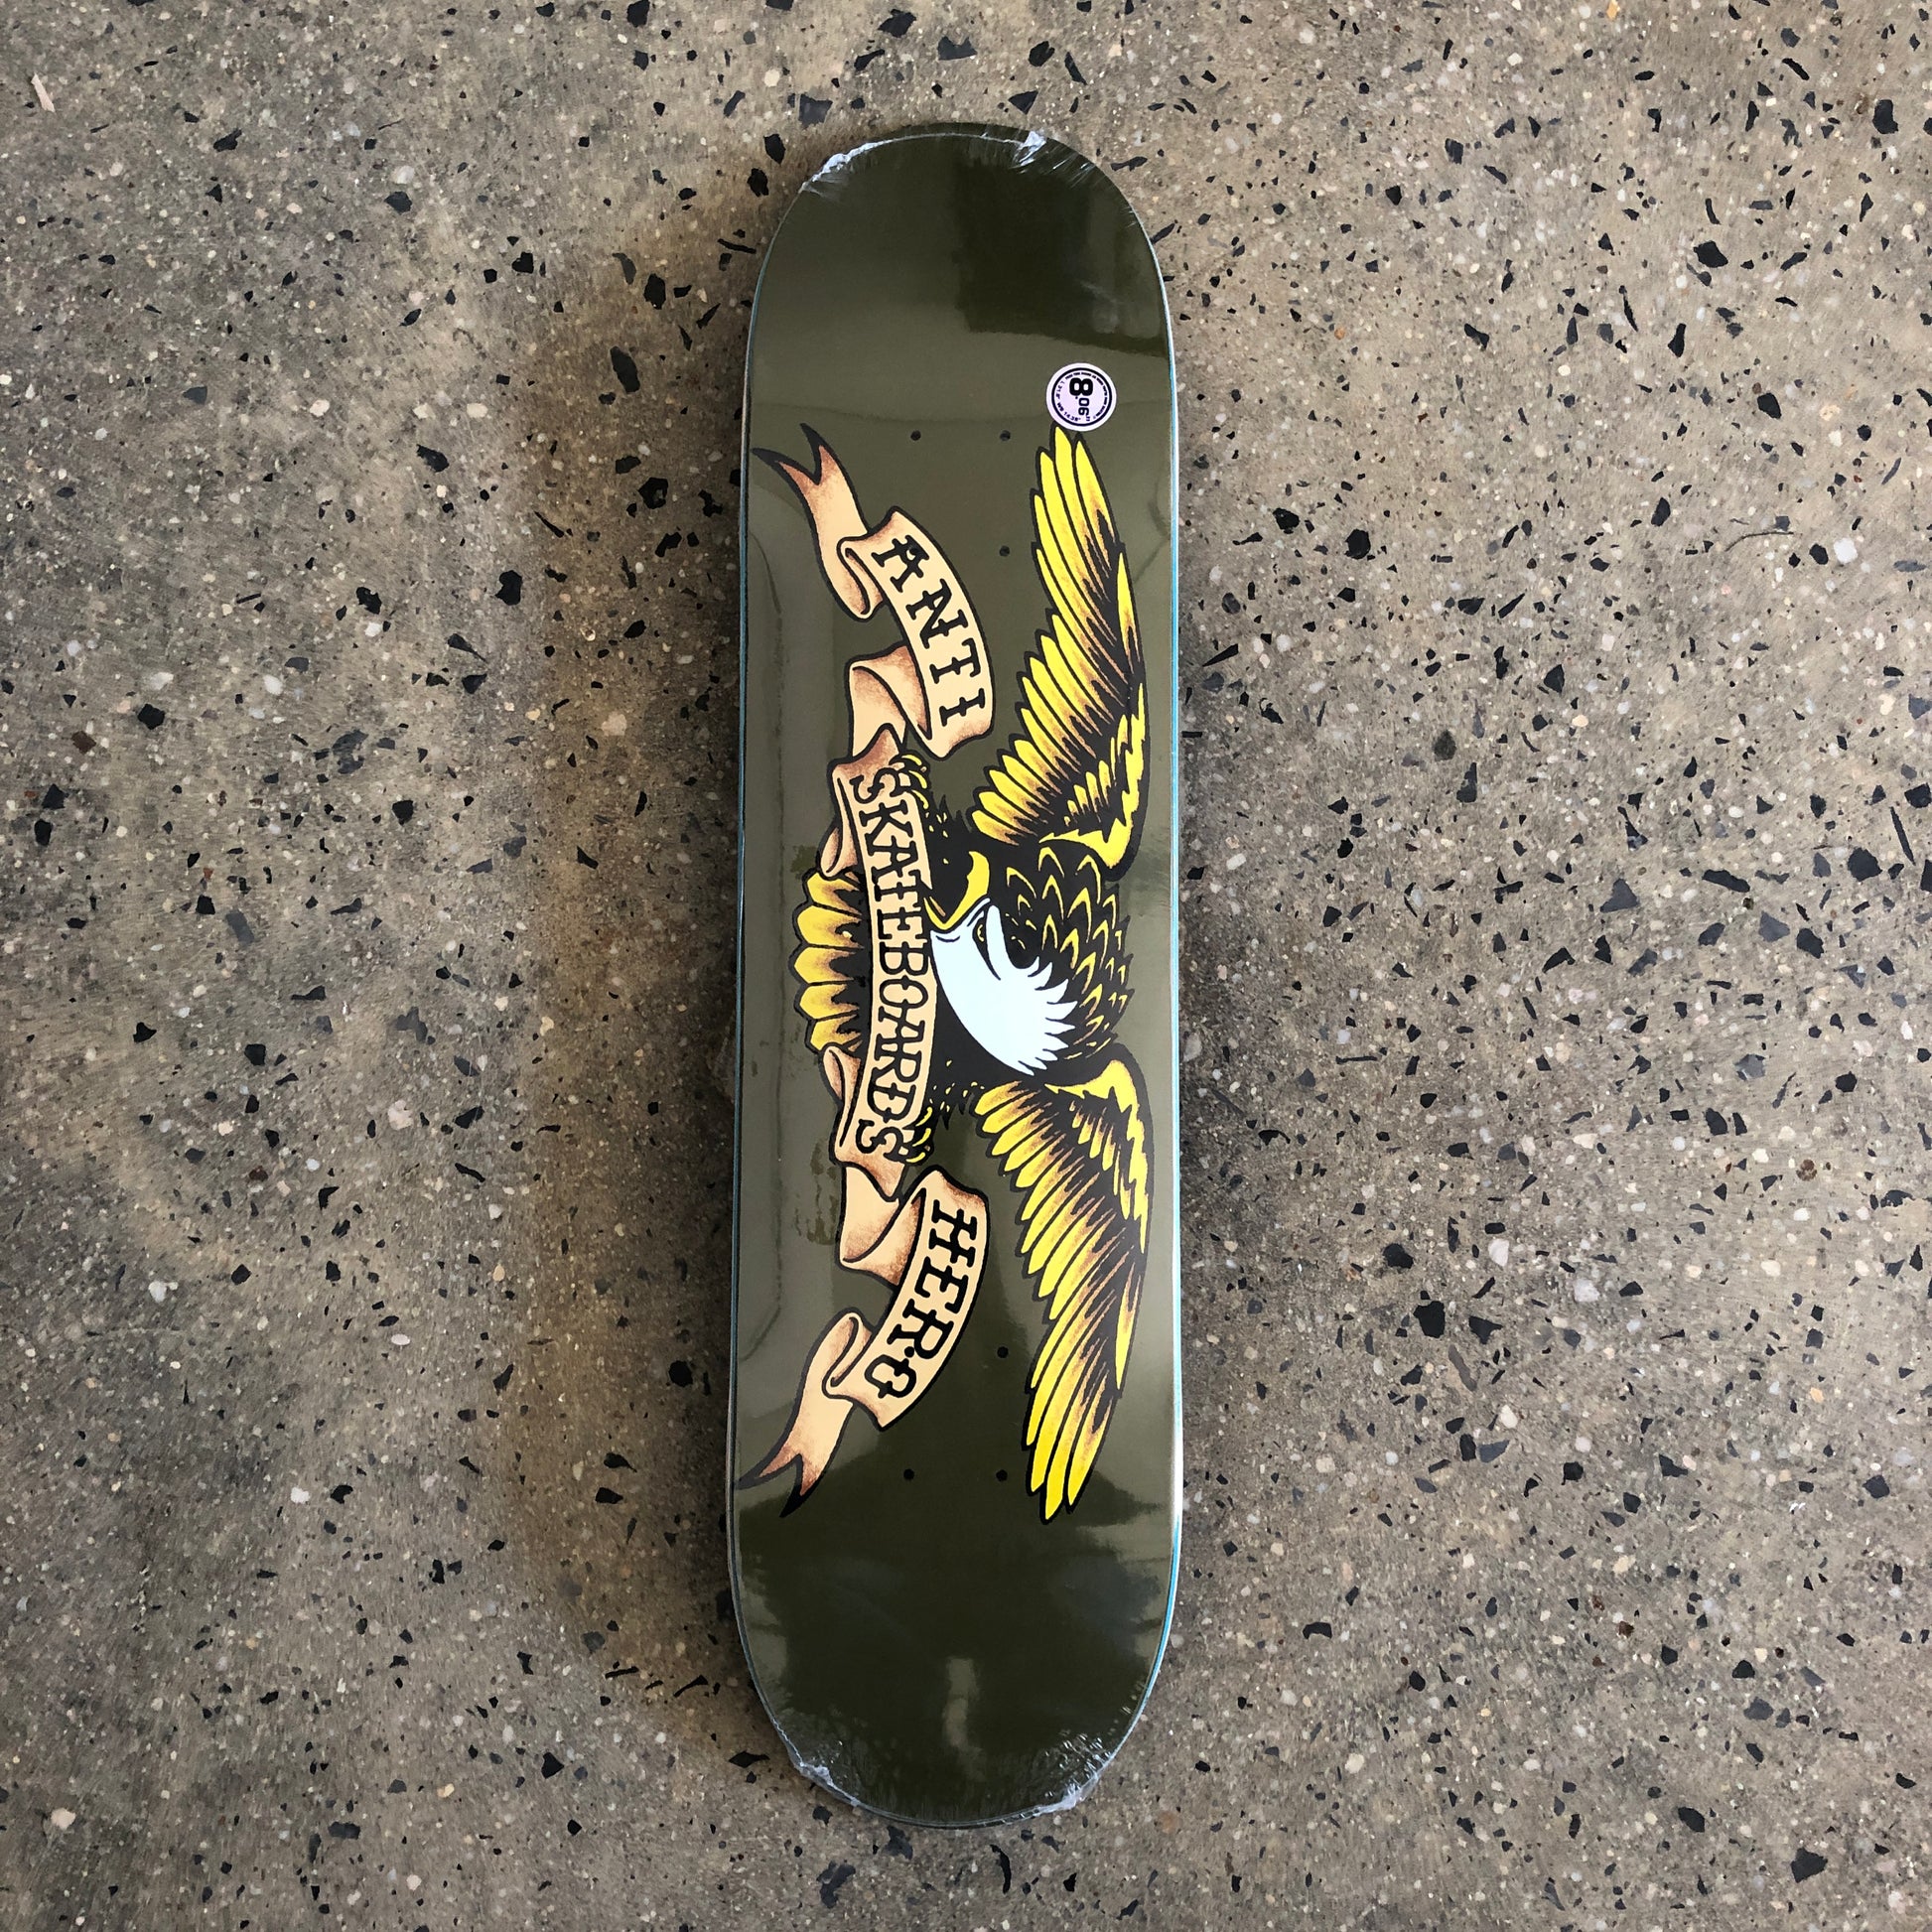 Eagle with spread wings on brown skate deck